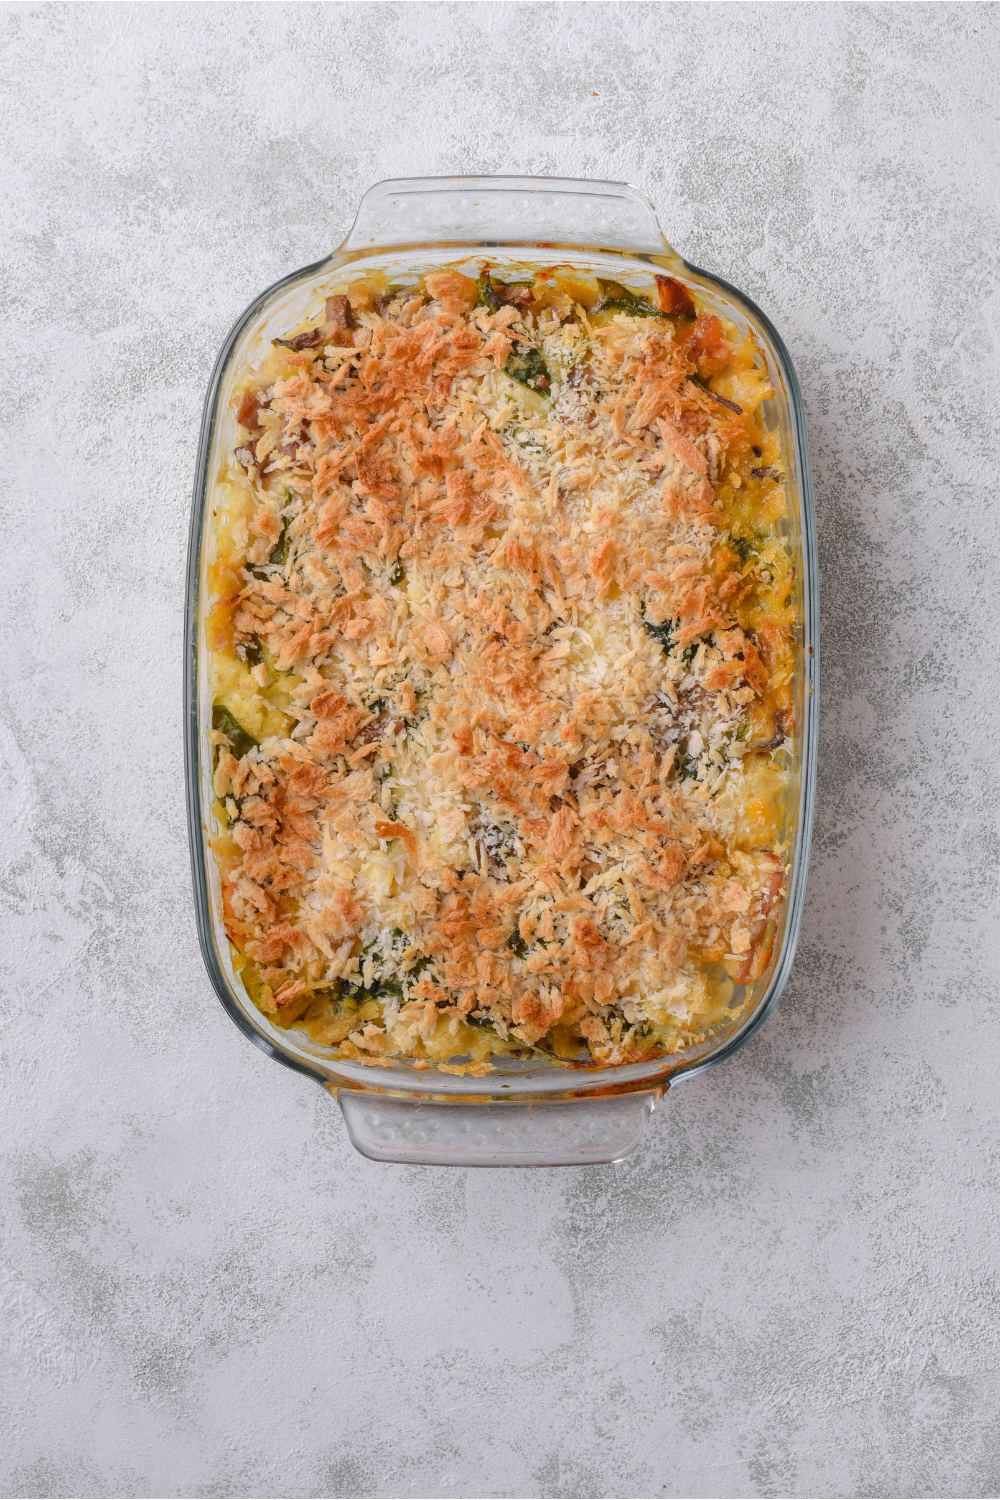 A baking dish filled with chicken cauliflower casserole covered in a layer of bread crumbs.